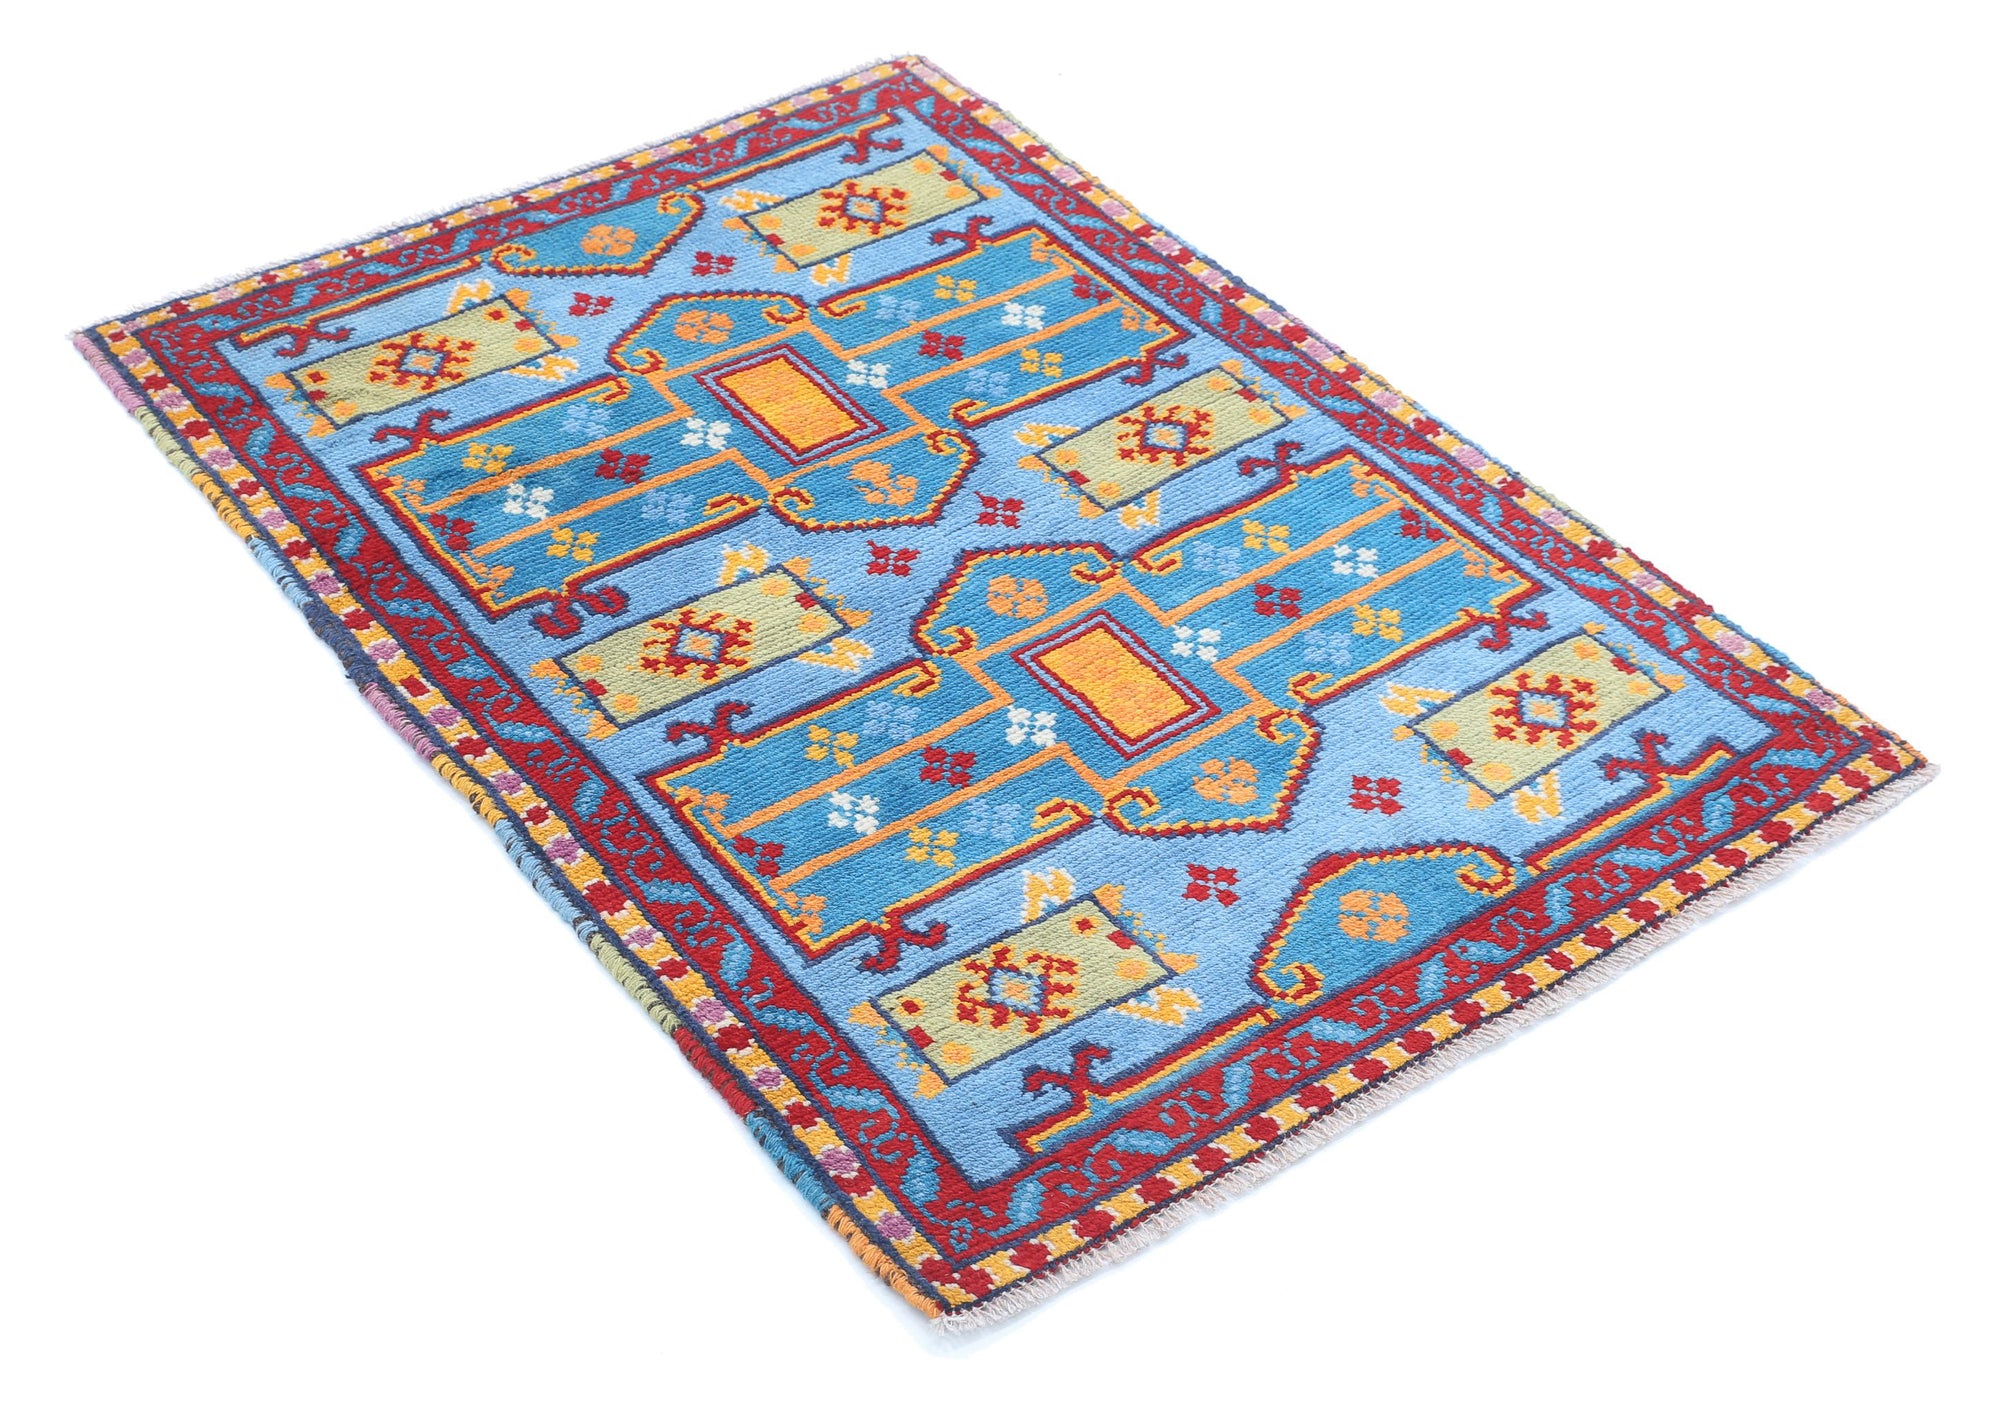 Revival-hand-knotted-qarghani-wool-rug-5014019-1.jpg